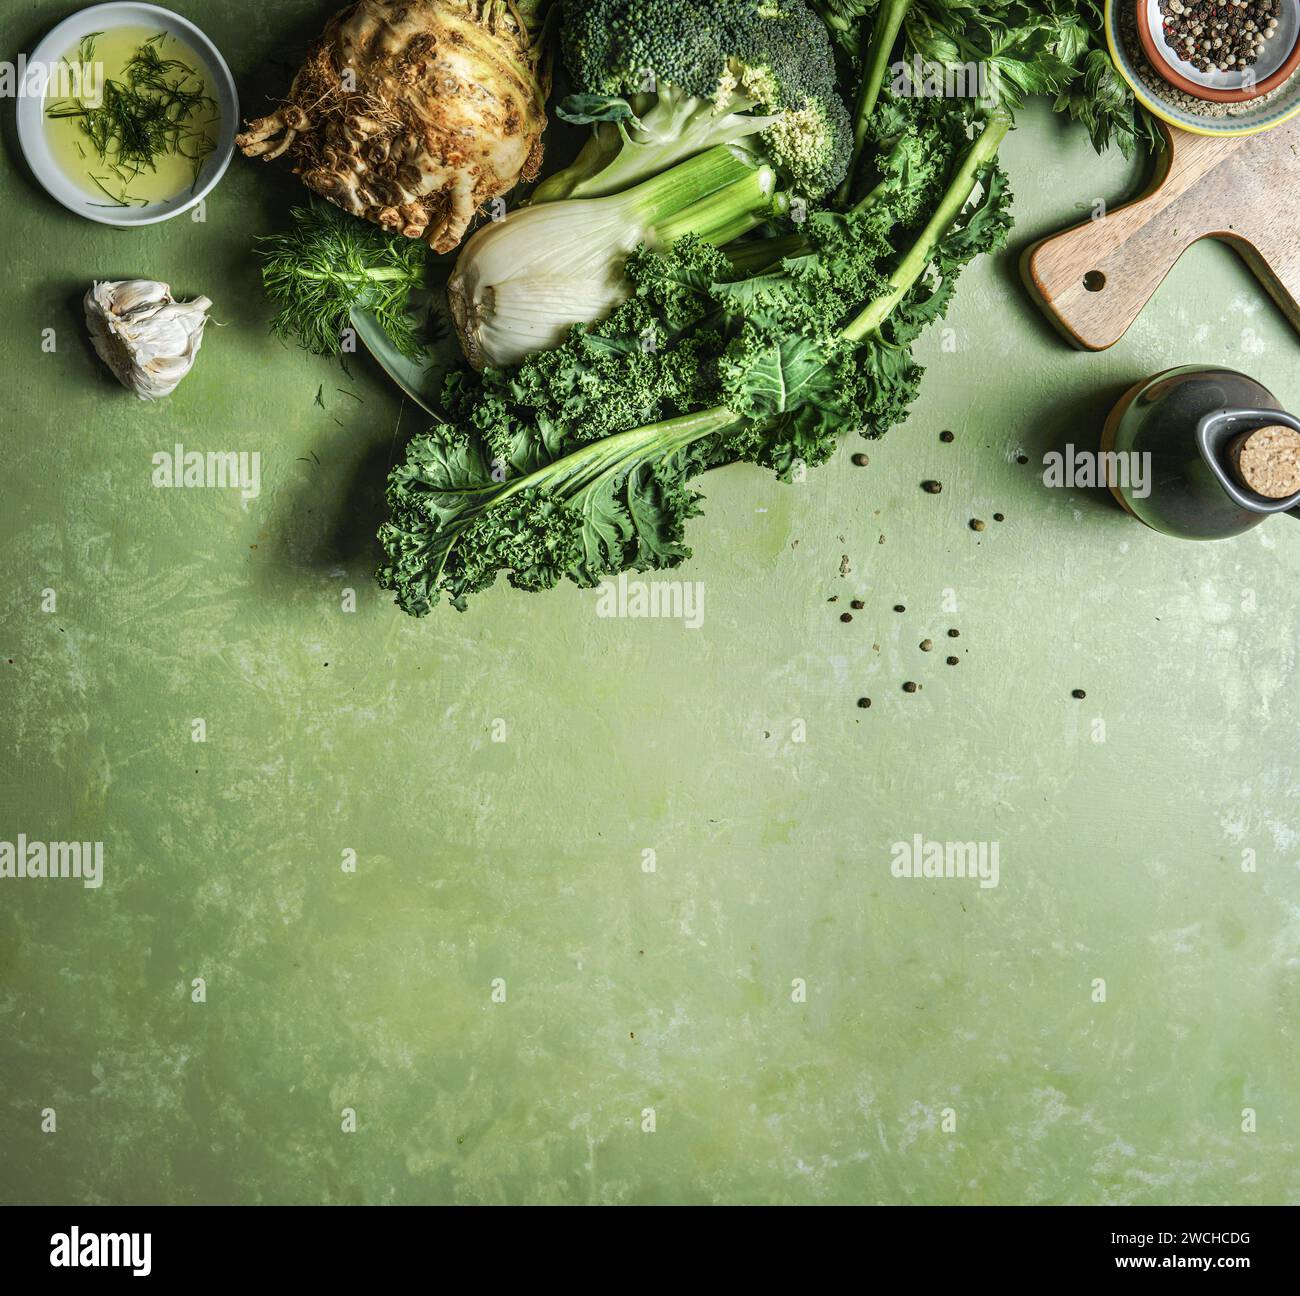 Green vegetables: broccoli, celery, fennel and kale on kitchen table with cooking ingredients, top view with copy space. Border Stock Photo